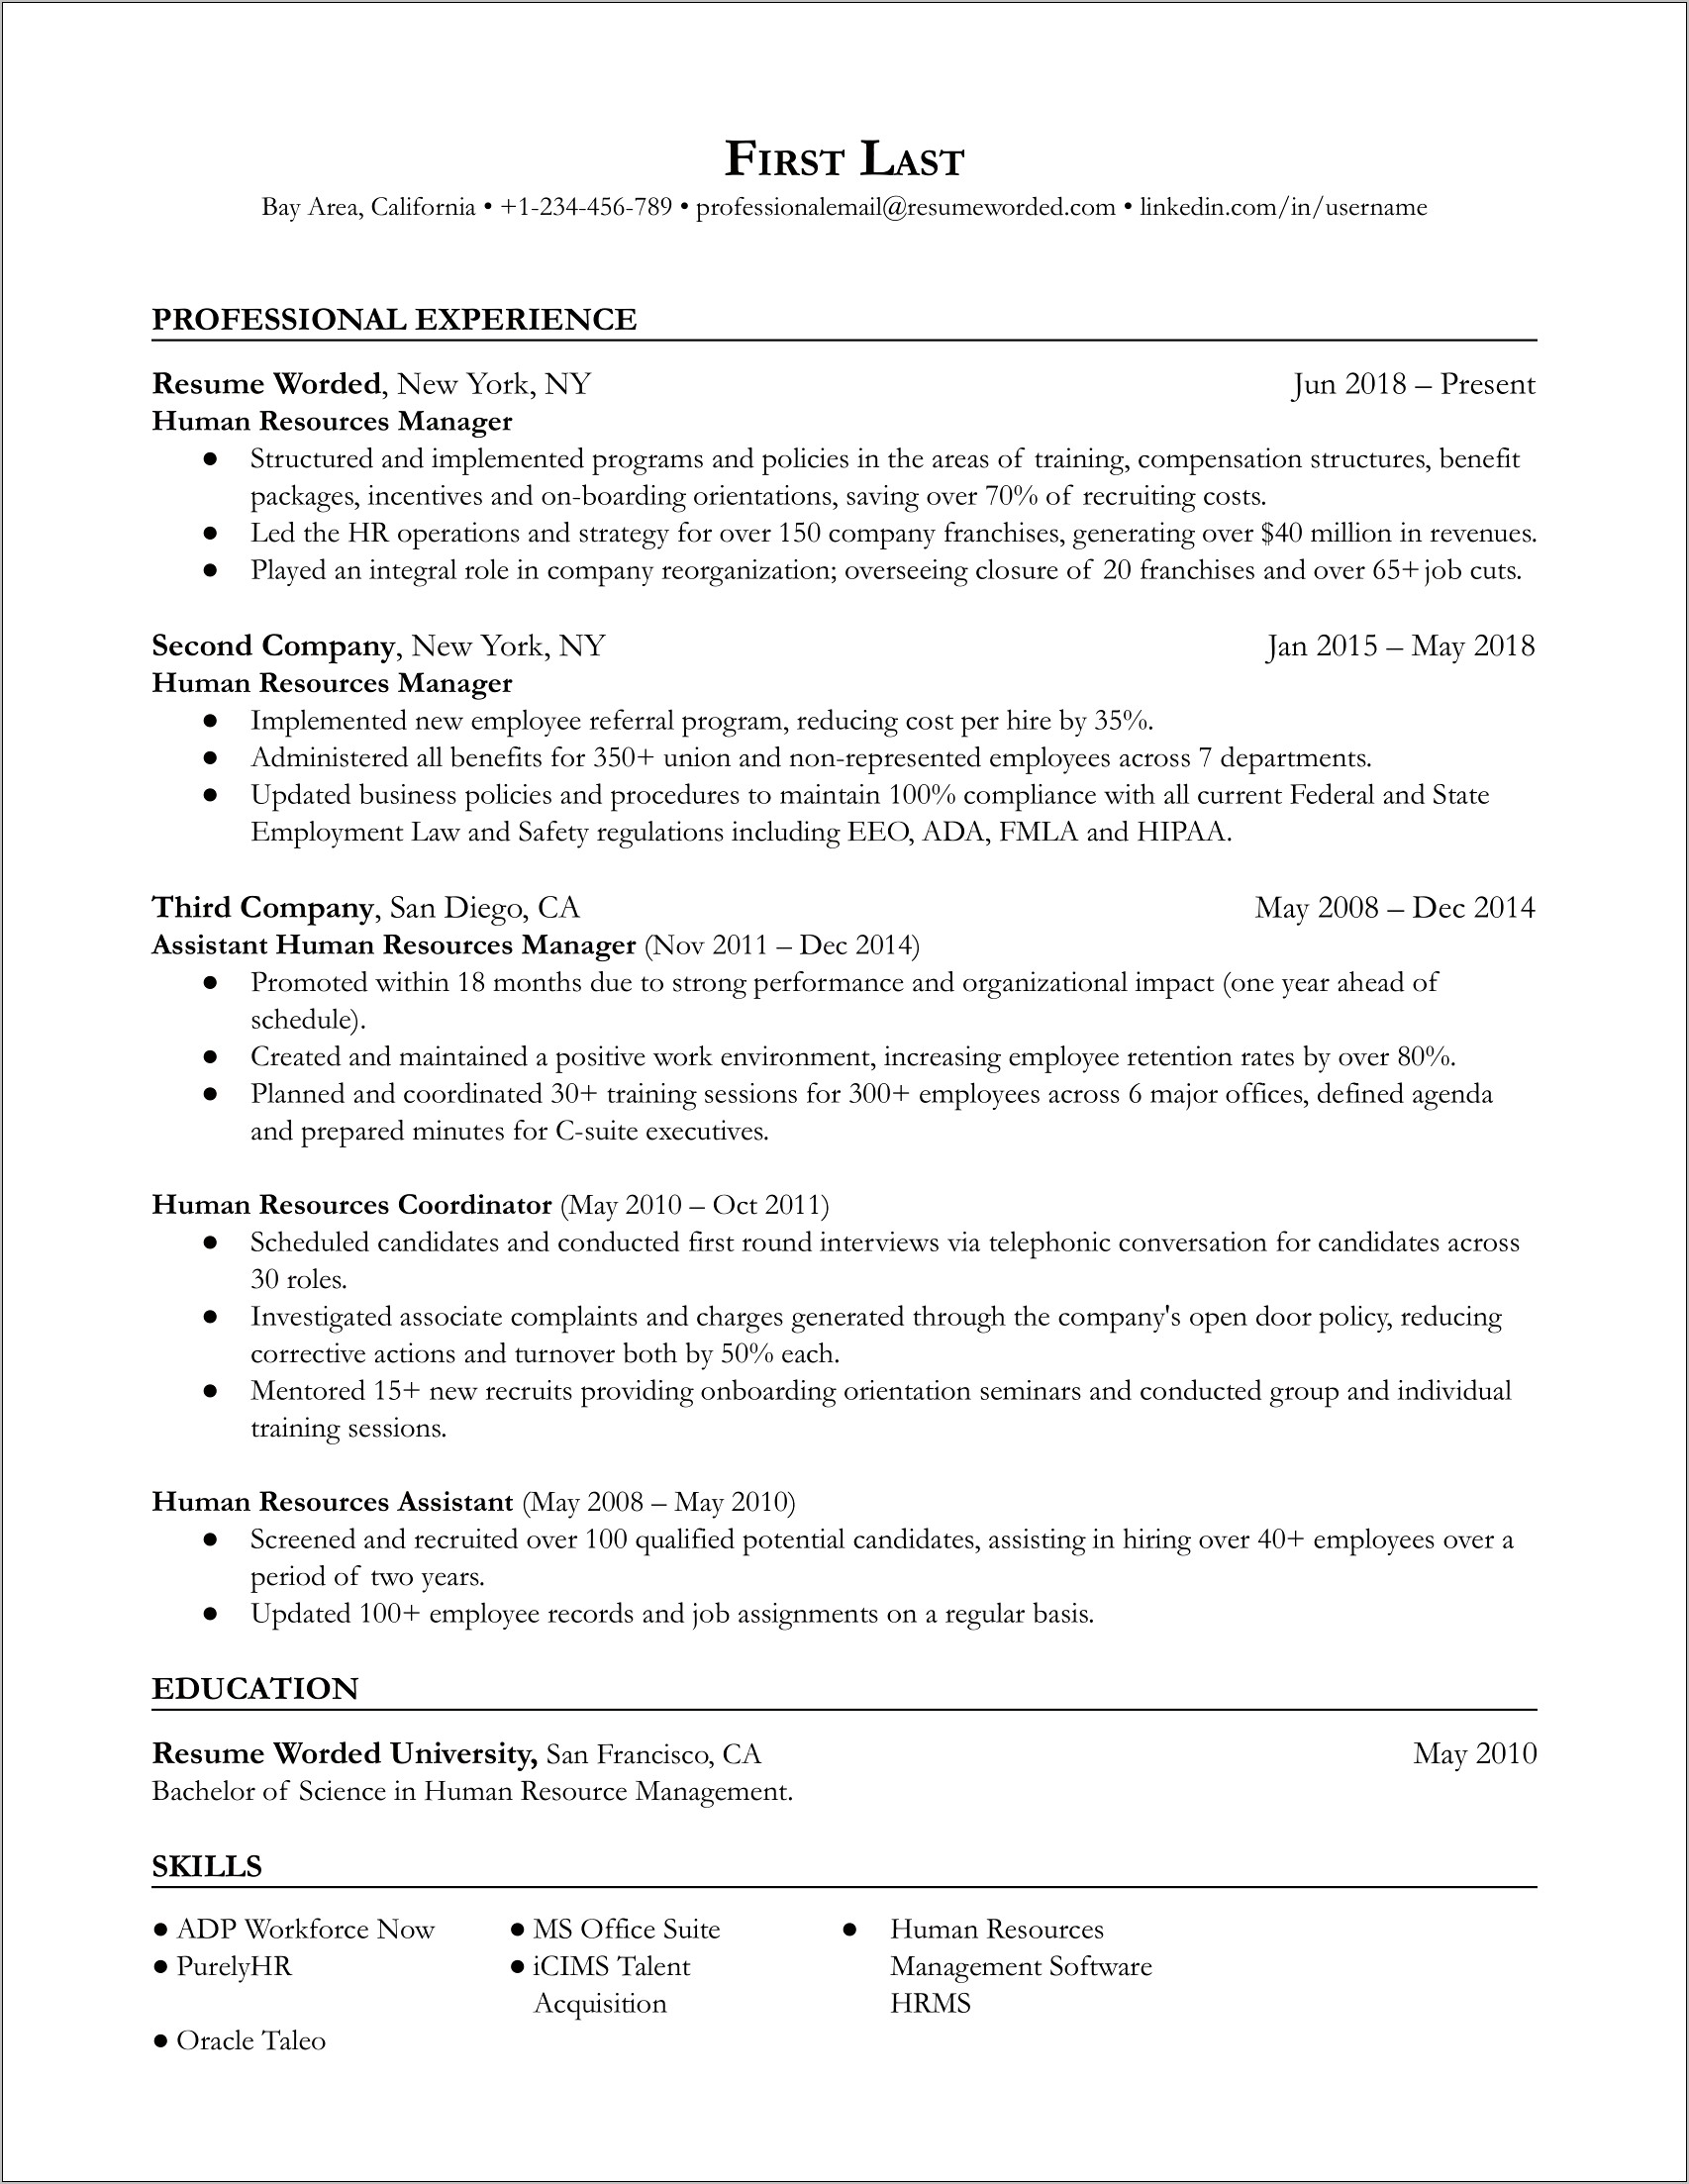 Human Resource Assistant Manager Resume